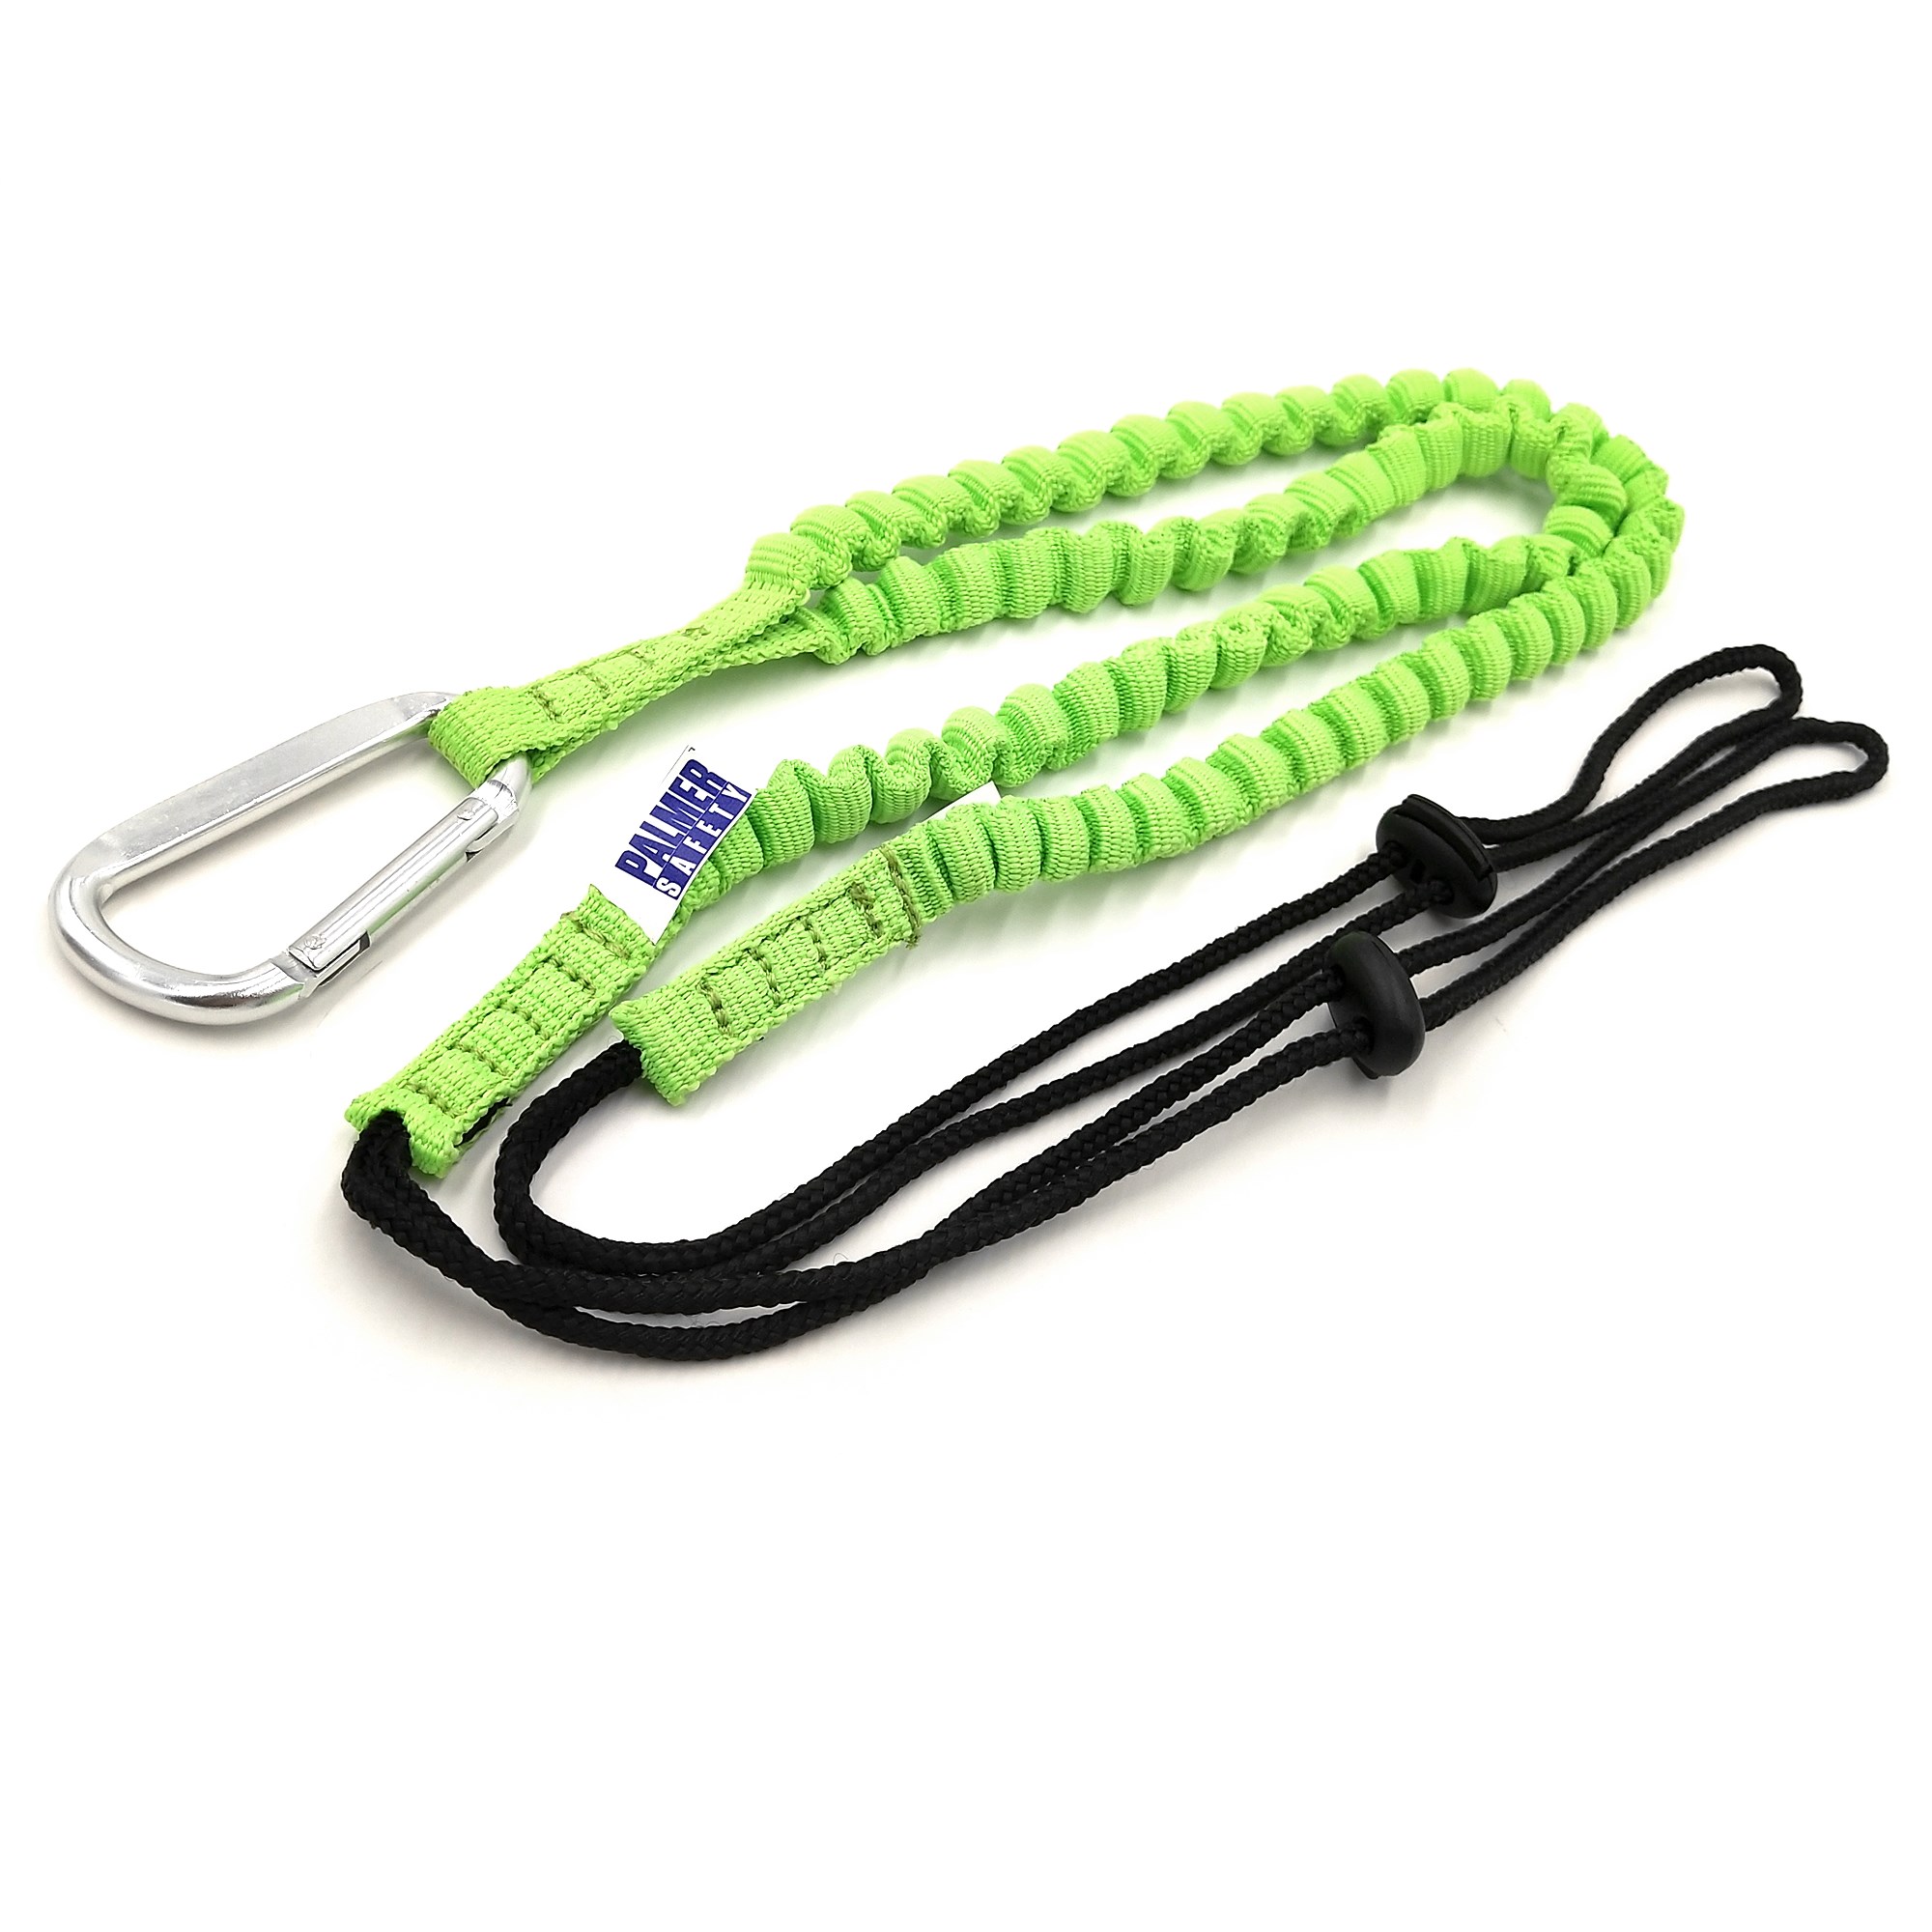 High Quality Tool Lanyard Retractable - 2020 New Coming Hot Sale Best Quality Retractable Tool Lanyard with Carabiner – Bison